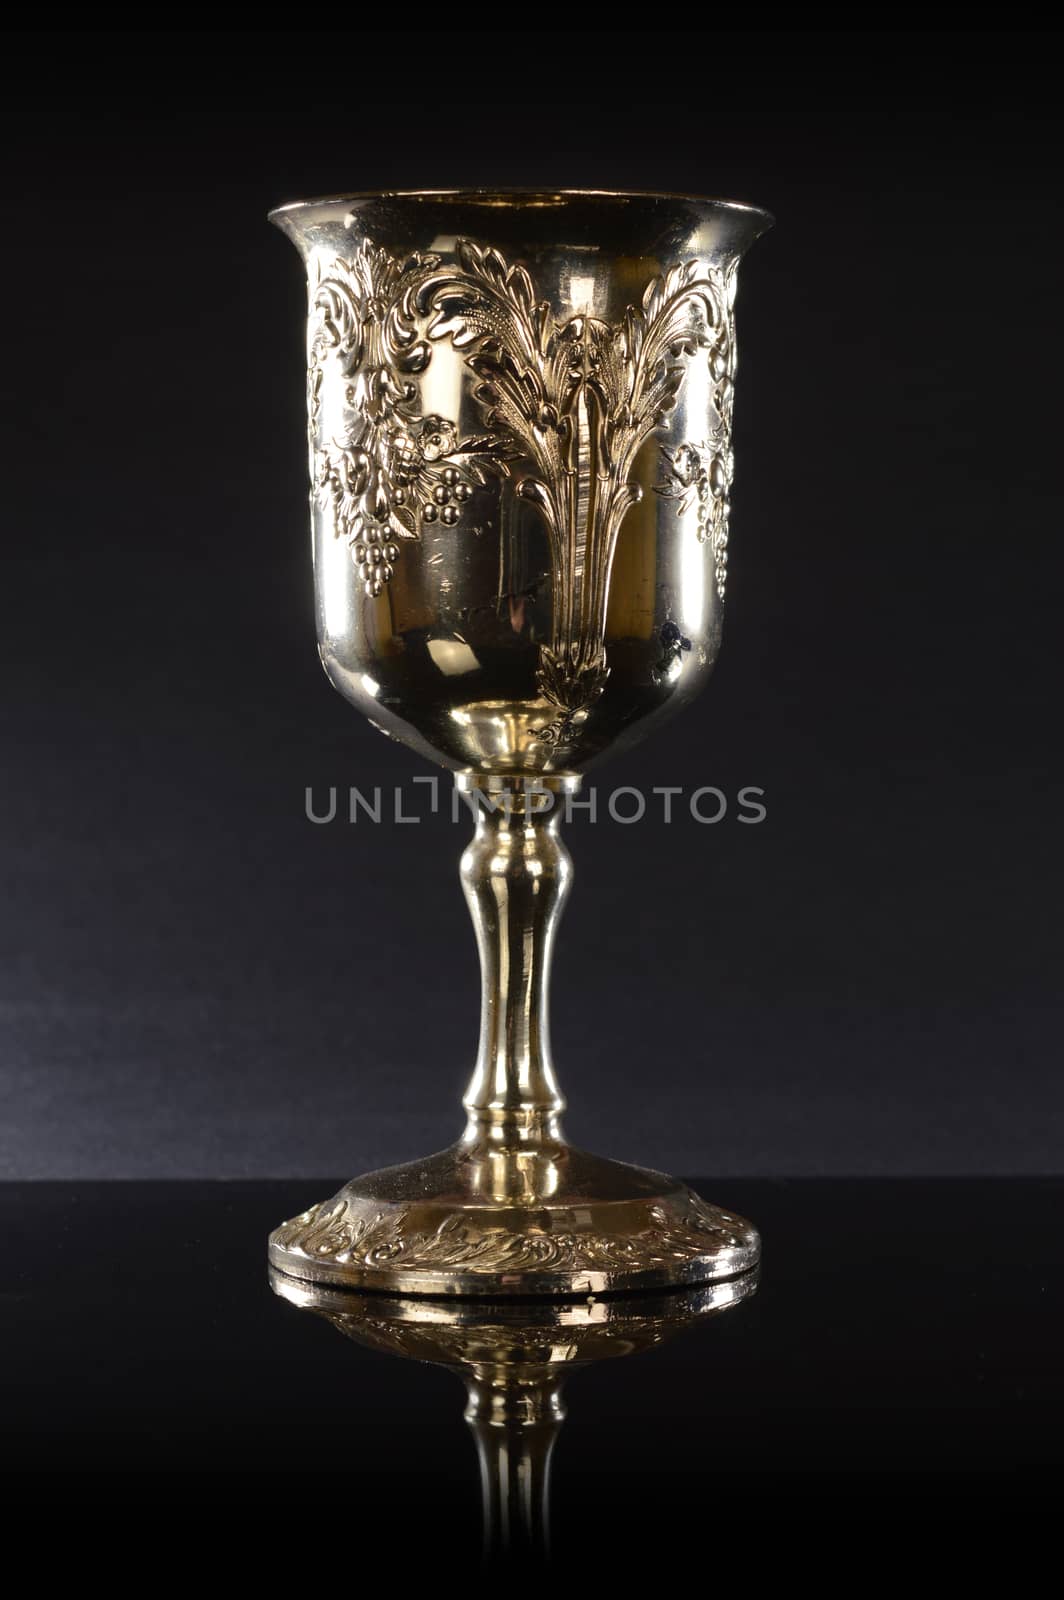 A treasured silver cup over a black reflective background.